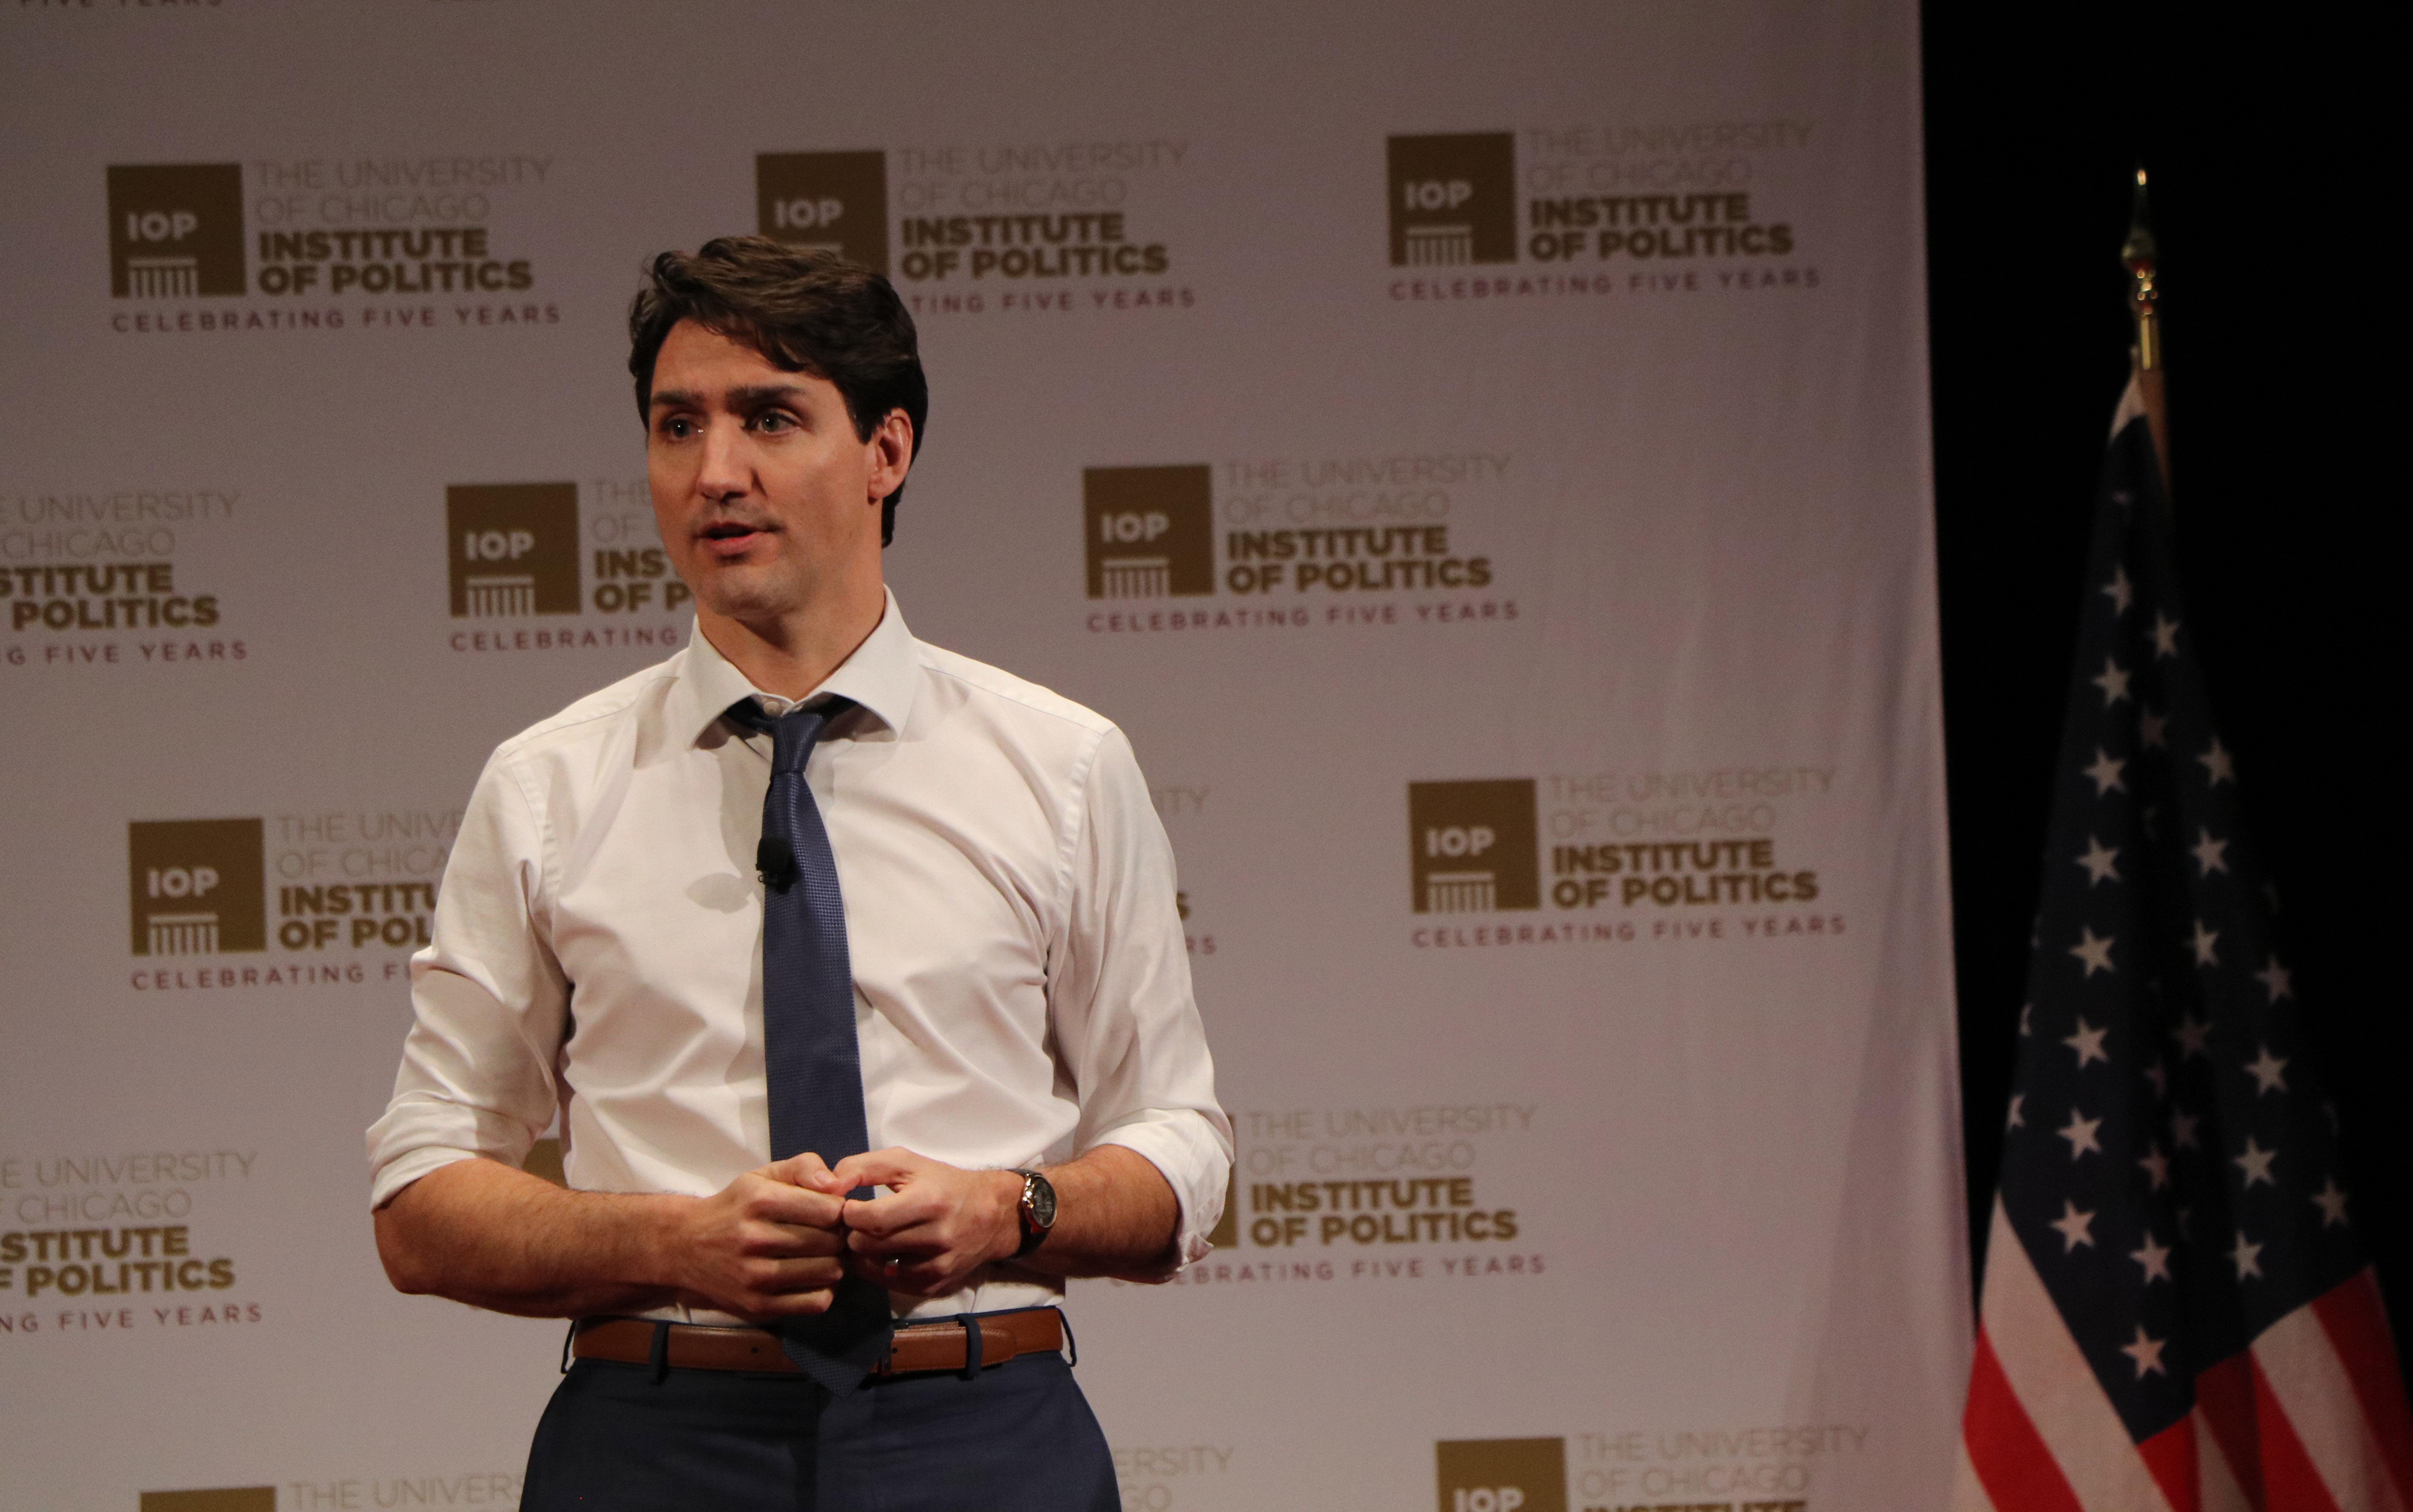 Canadian Prime Minister Justin Trudeau speaks at the University of Chicago's Institute of Politics on Wednesday. (Evan Garcia / Chicago Tonight)